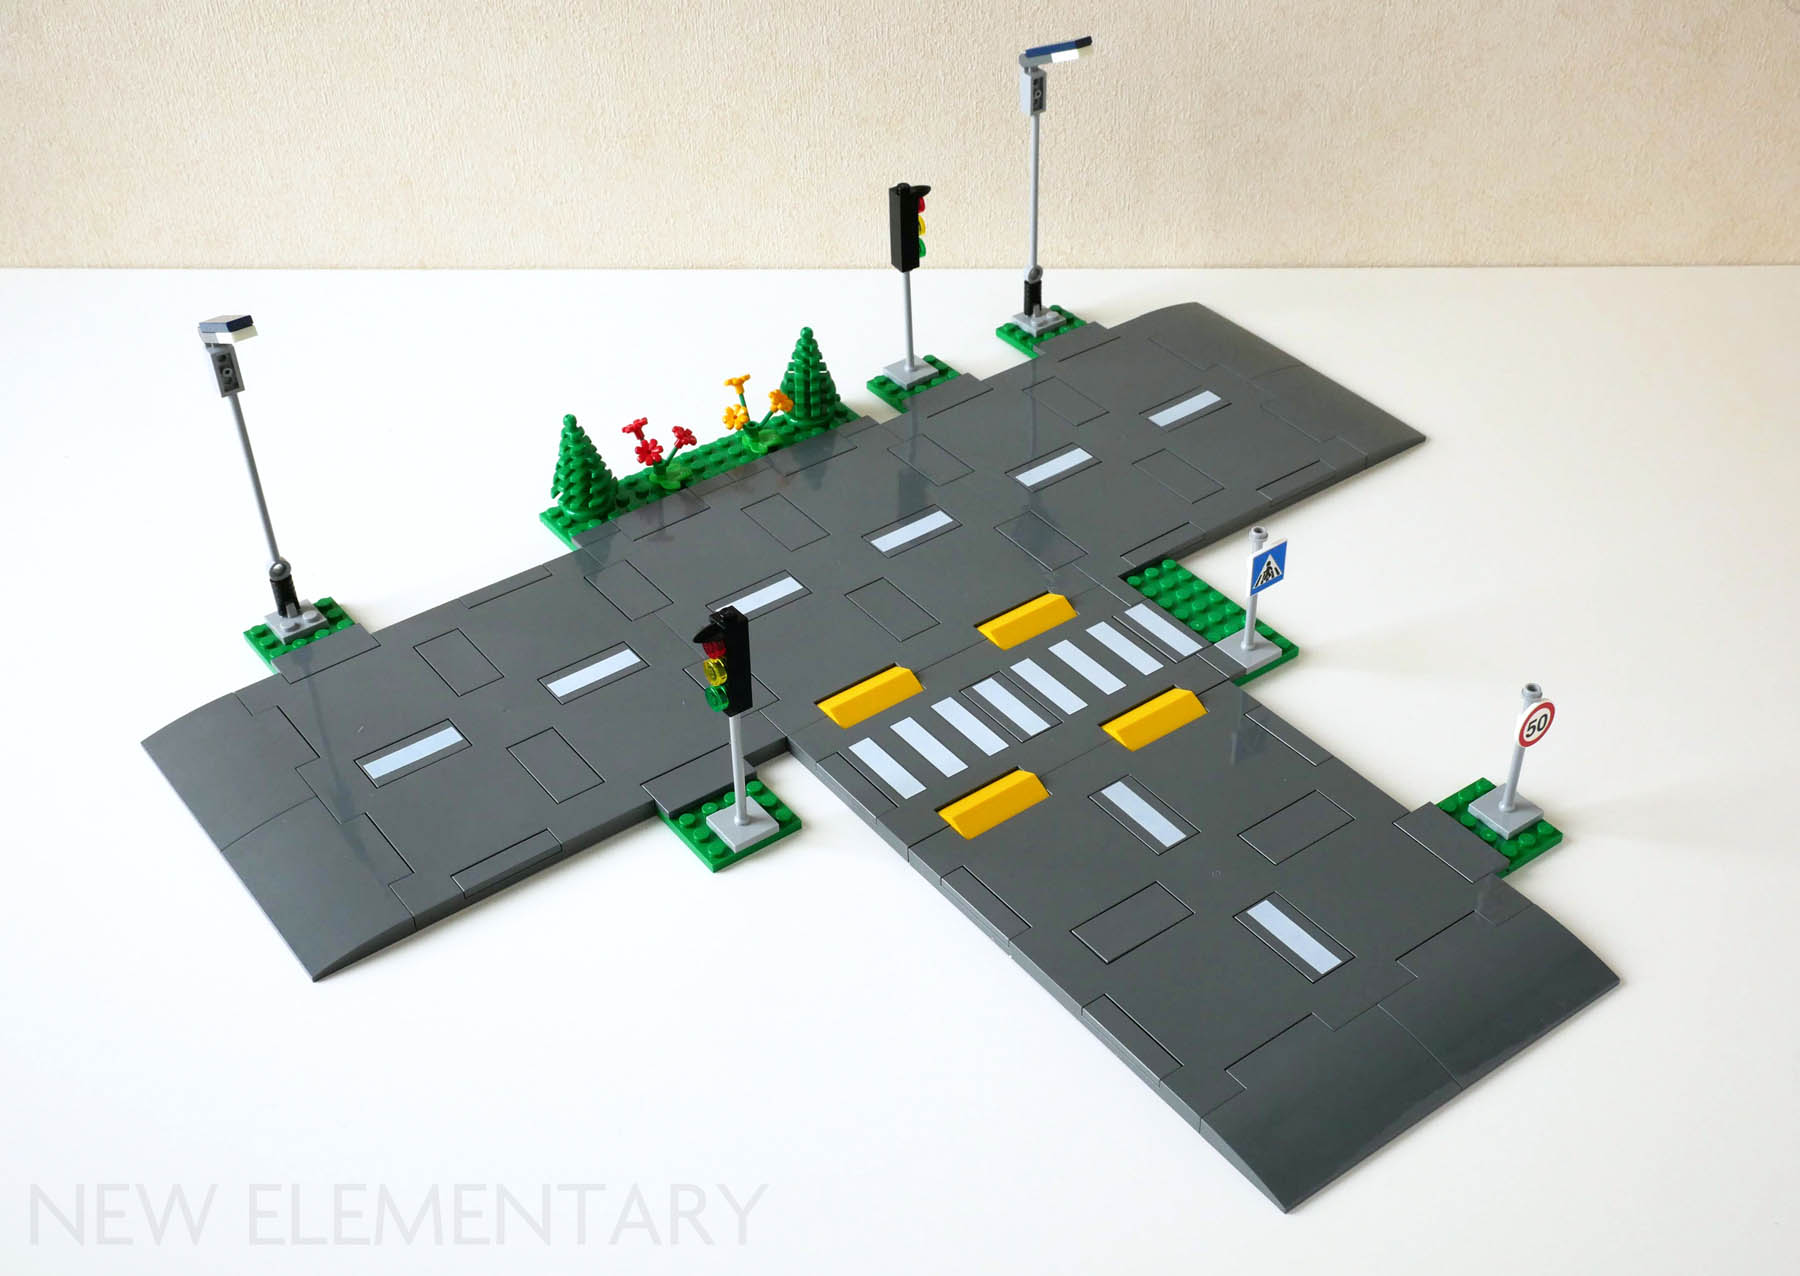 Easy way to make modular buildings compatible with the new road plates  without having to modify them : r/lego